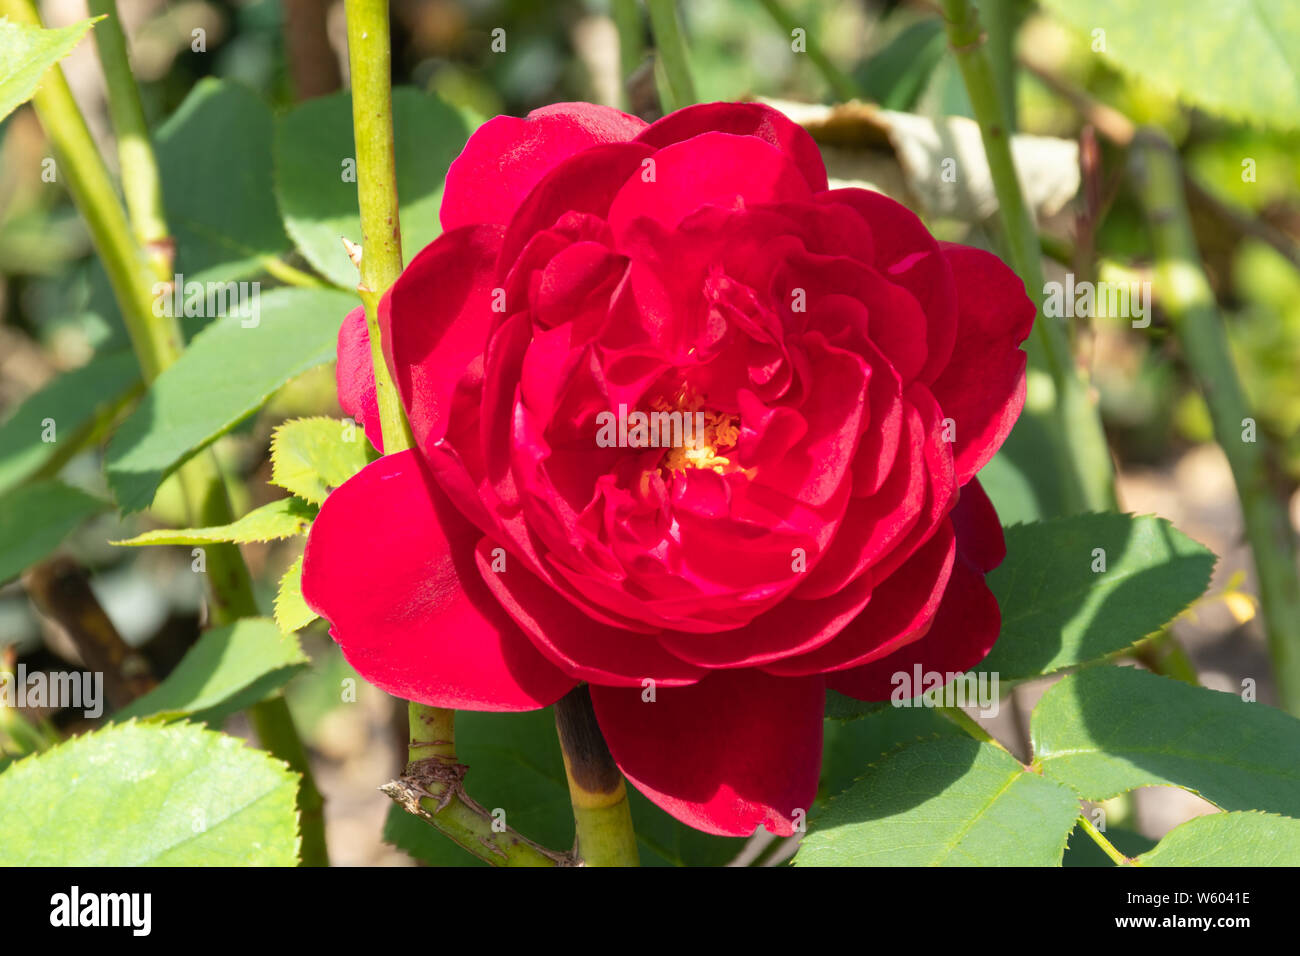 Darcey Bussell variety of English Shrub Rose bred by David Austin. Close-up of a crimson-pink flower or bloom. Rosa Ausdecorum. Stock Photo